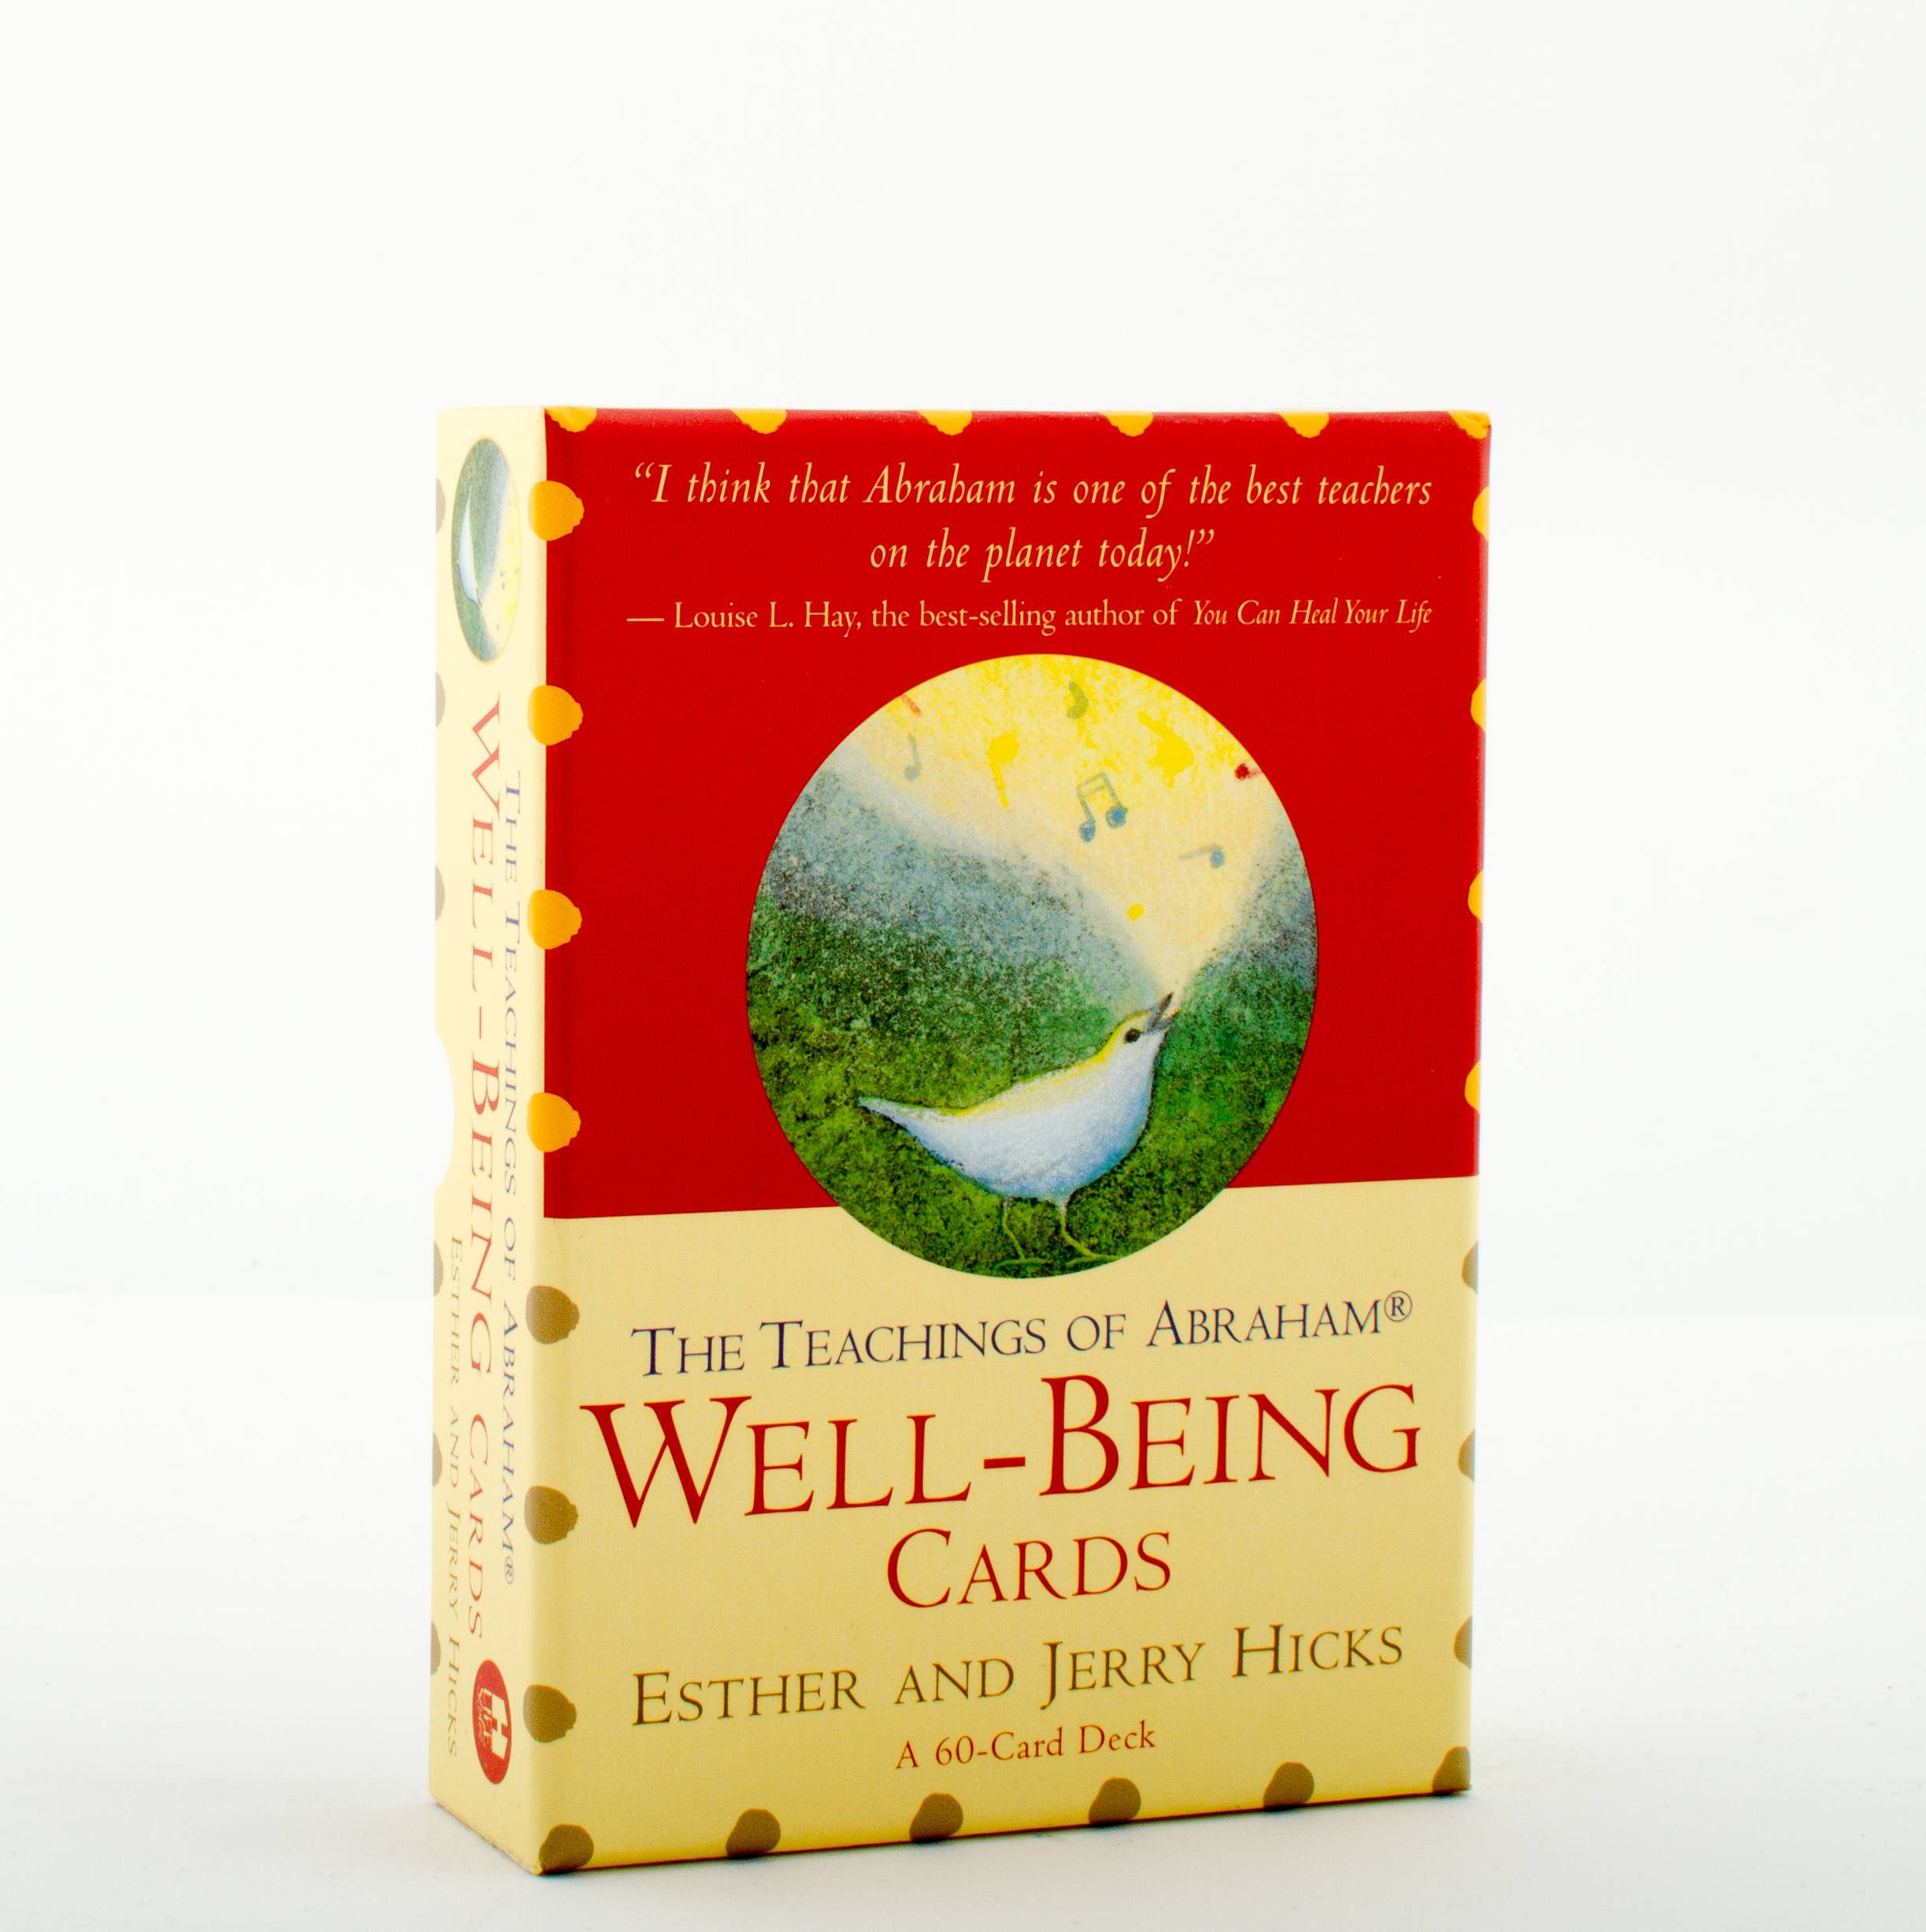 Teachings of abraham - well-being cards